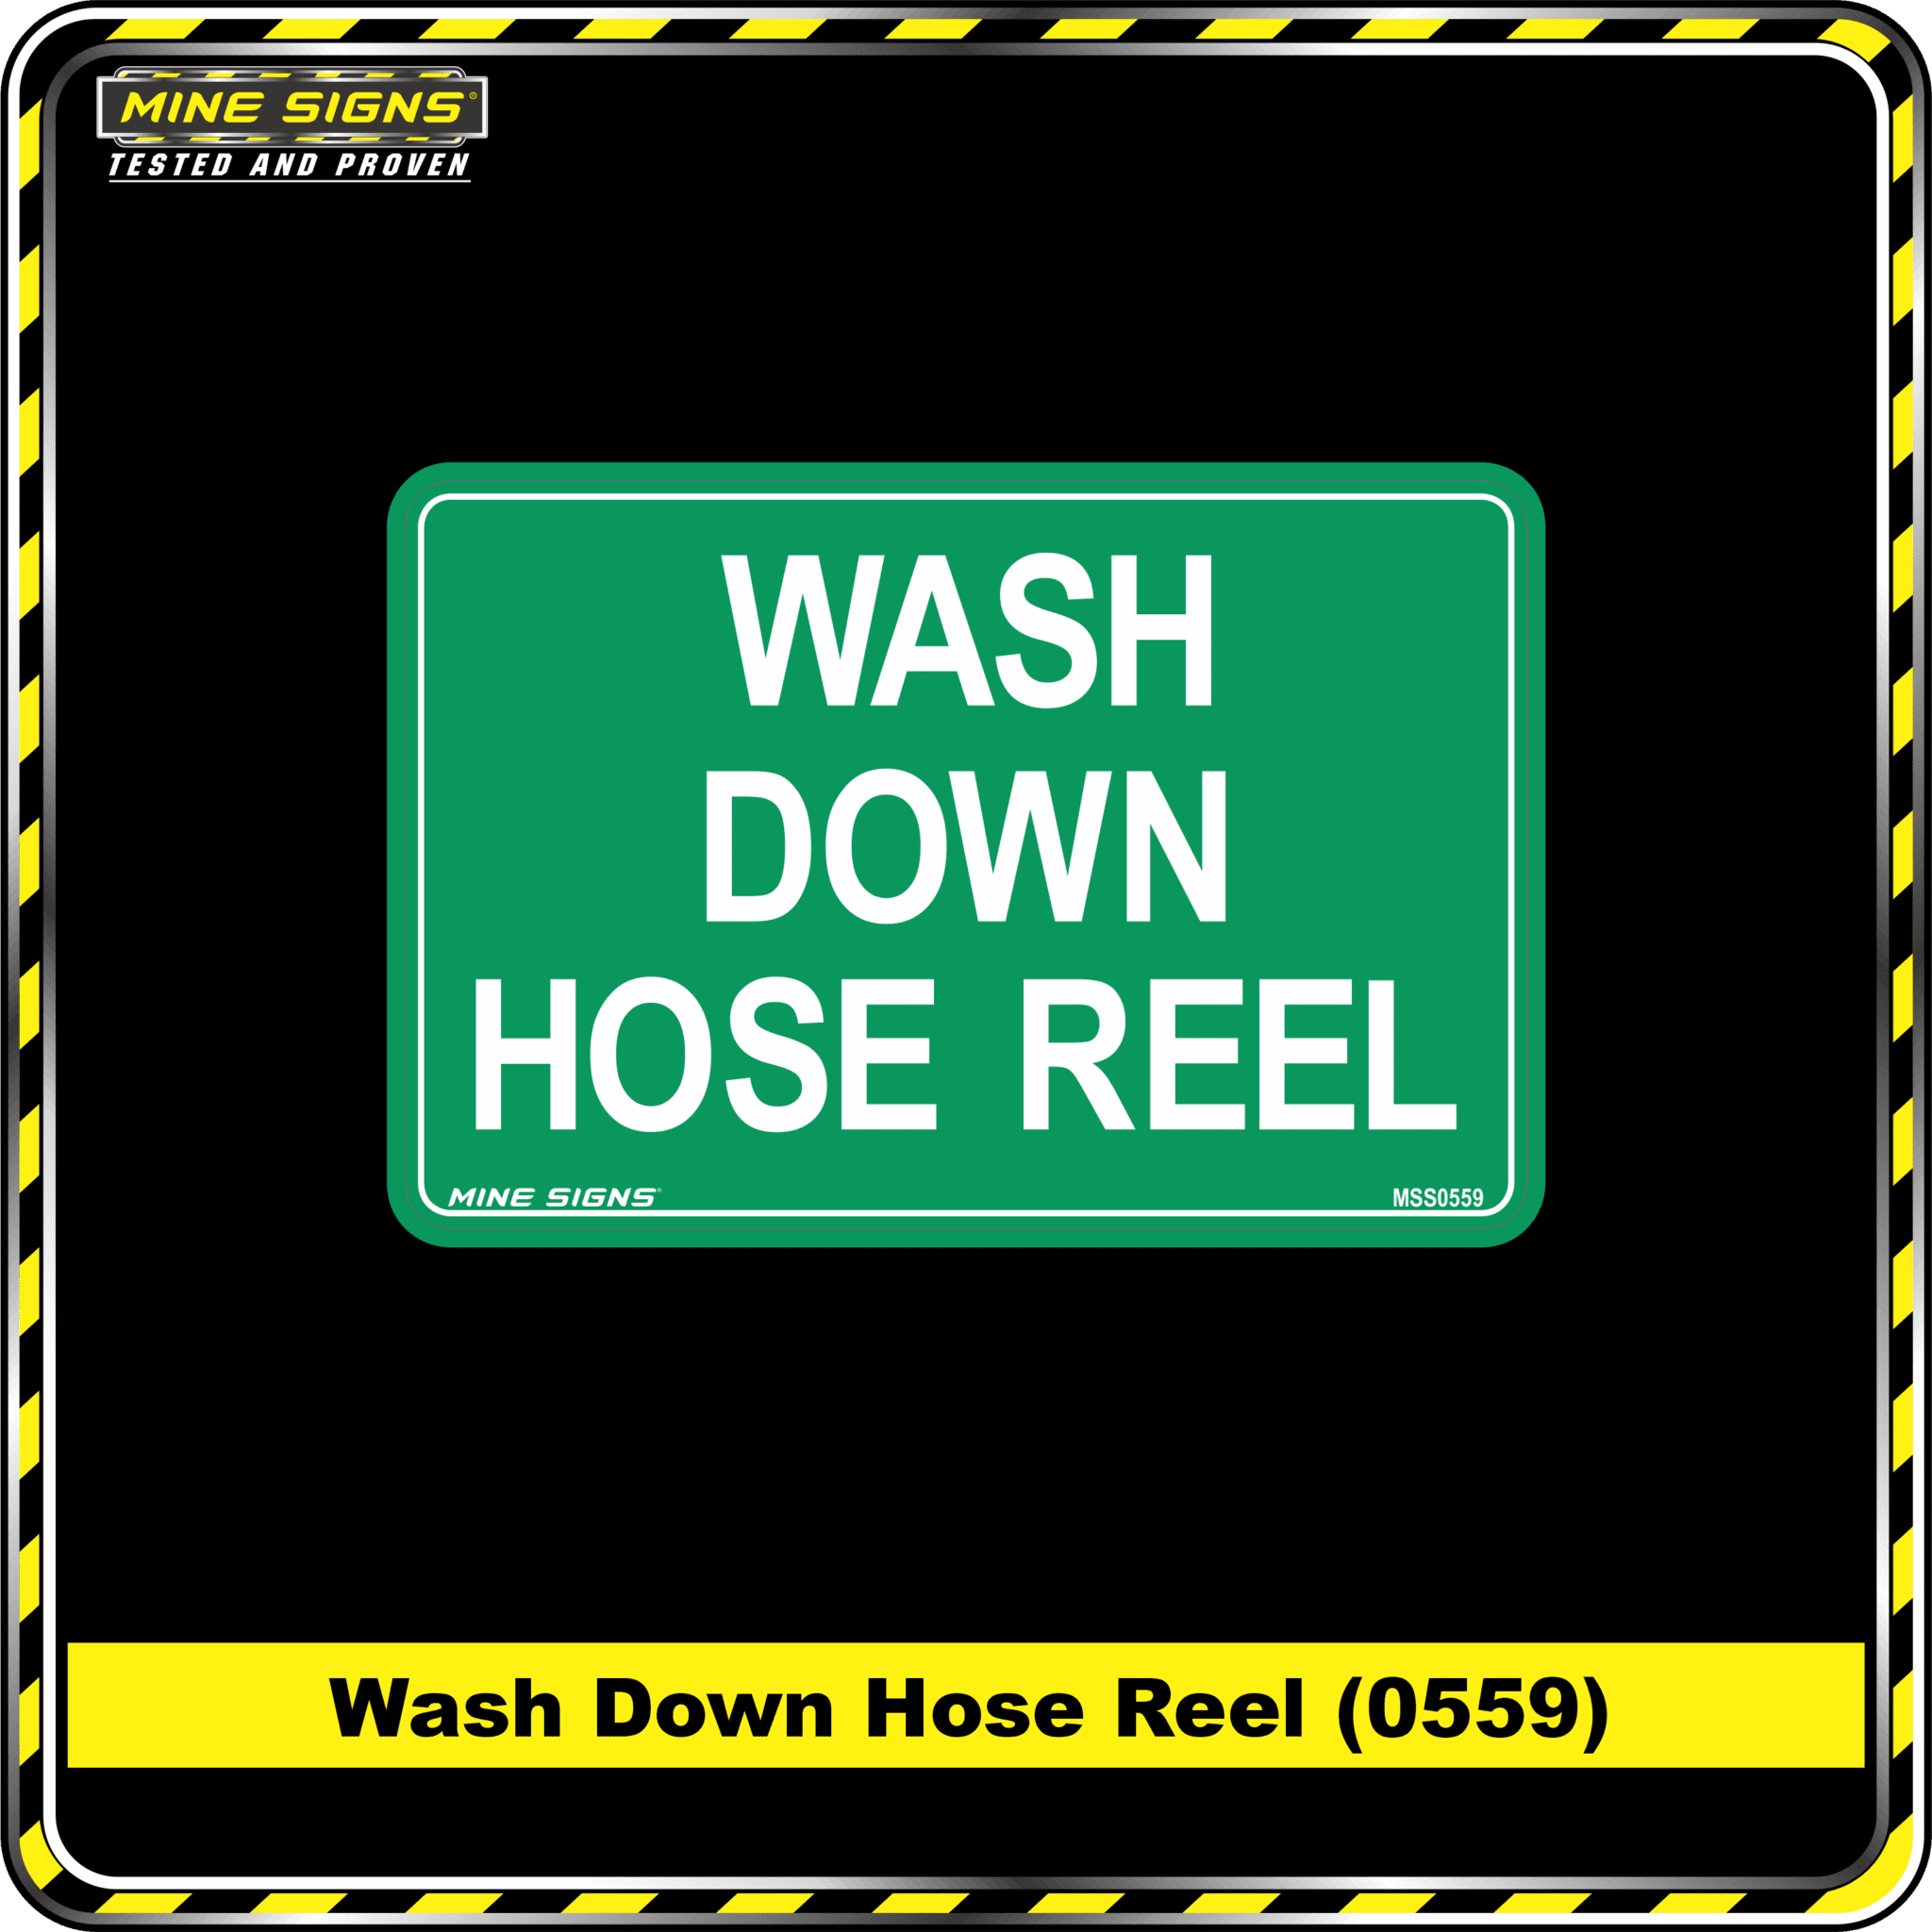 MS - Product Background - Safety Signs - Wash Down Hose Reel 0559